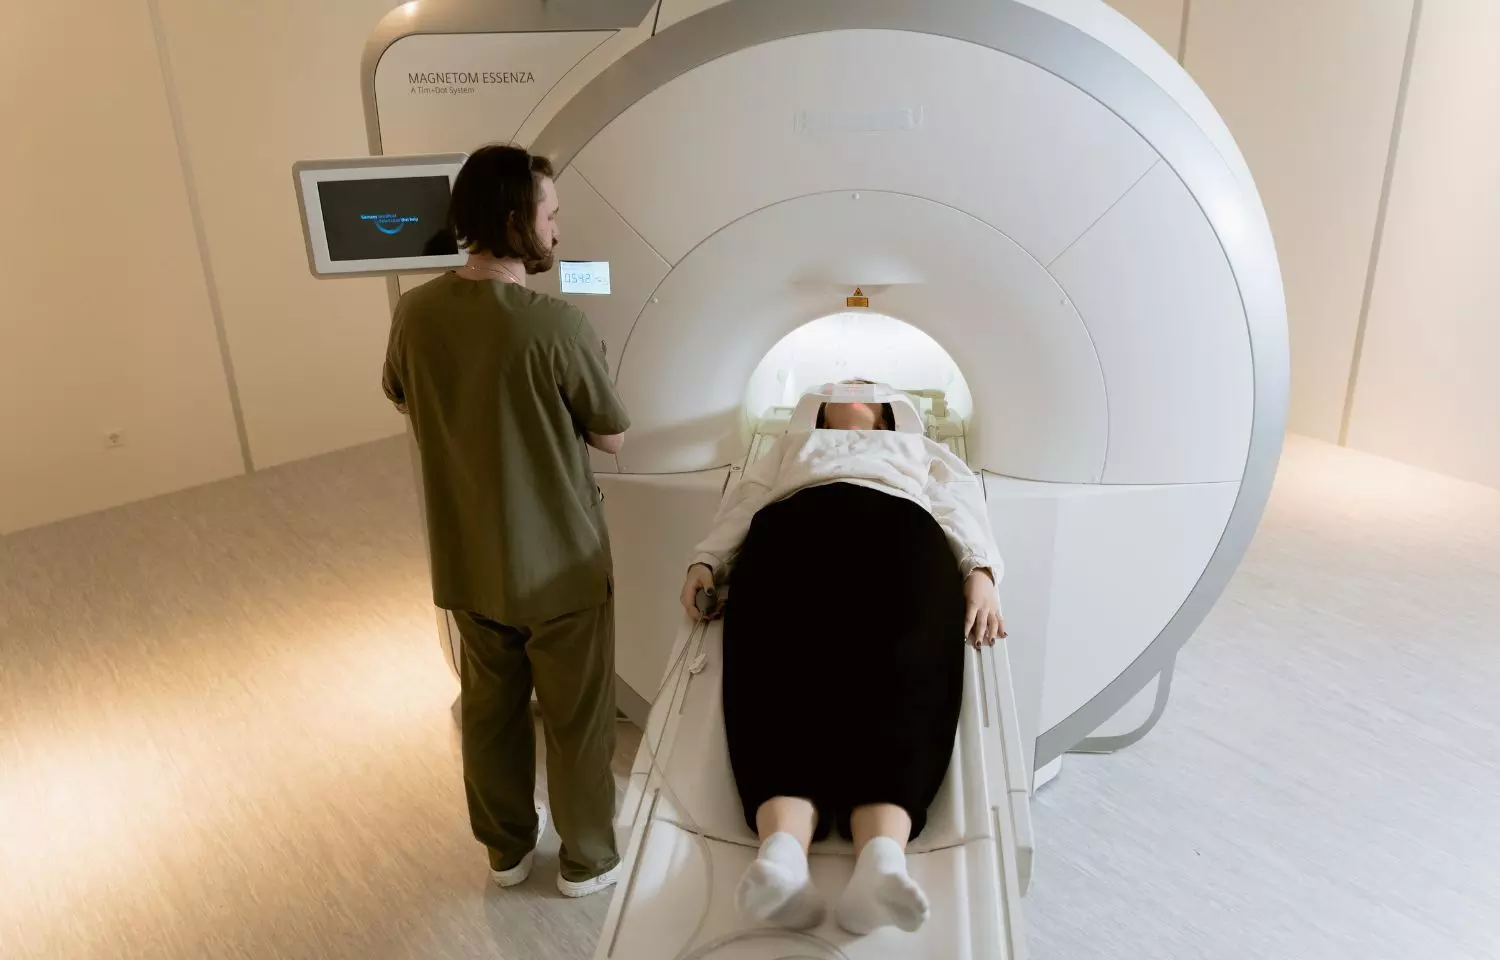 Abdominal CT imaging has great potential for Opportunistic screening: Study